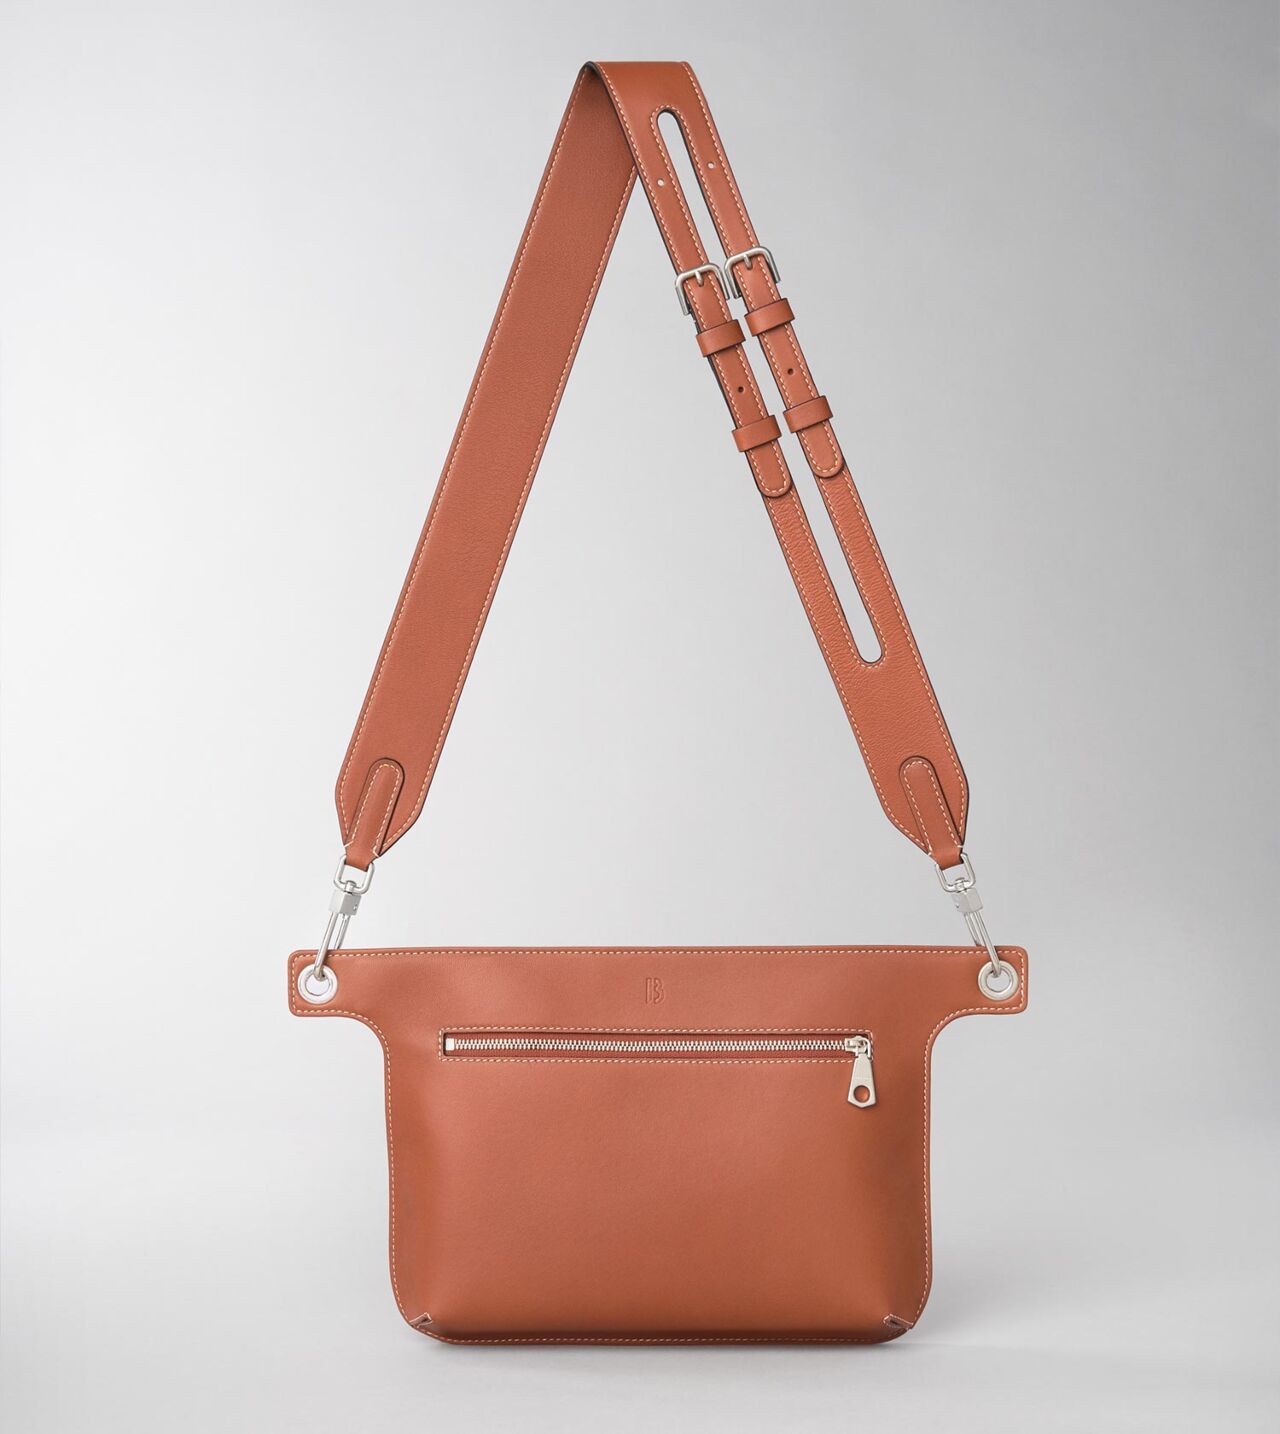 Cross Body Pouch in Saddle Tan Leather